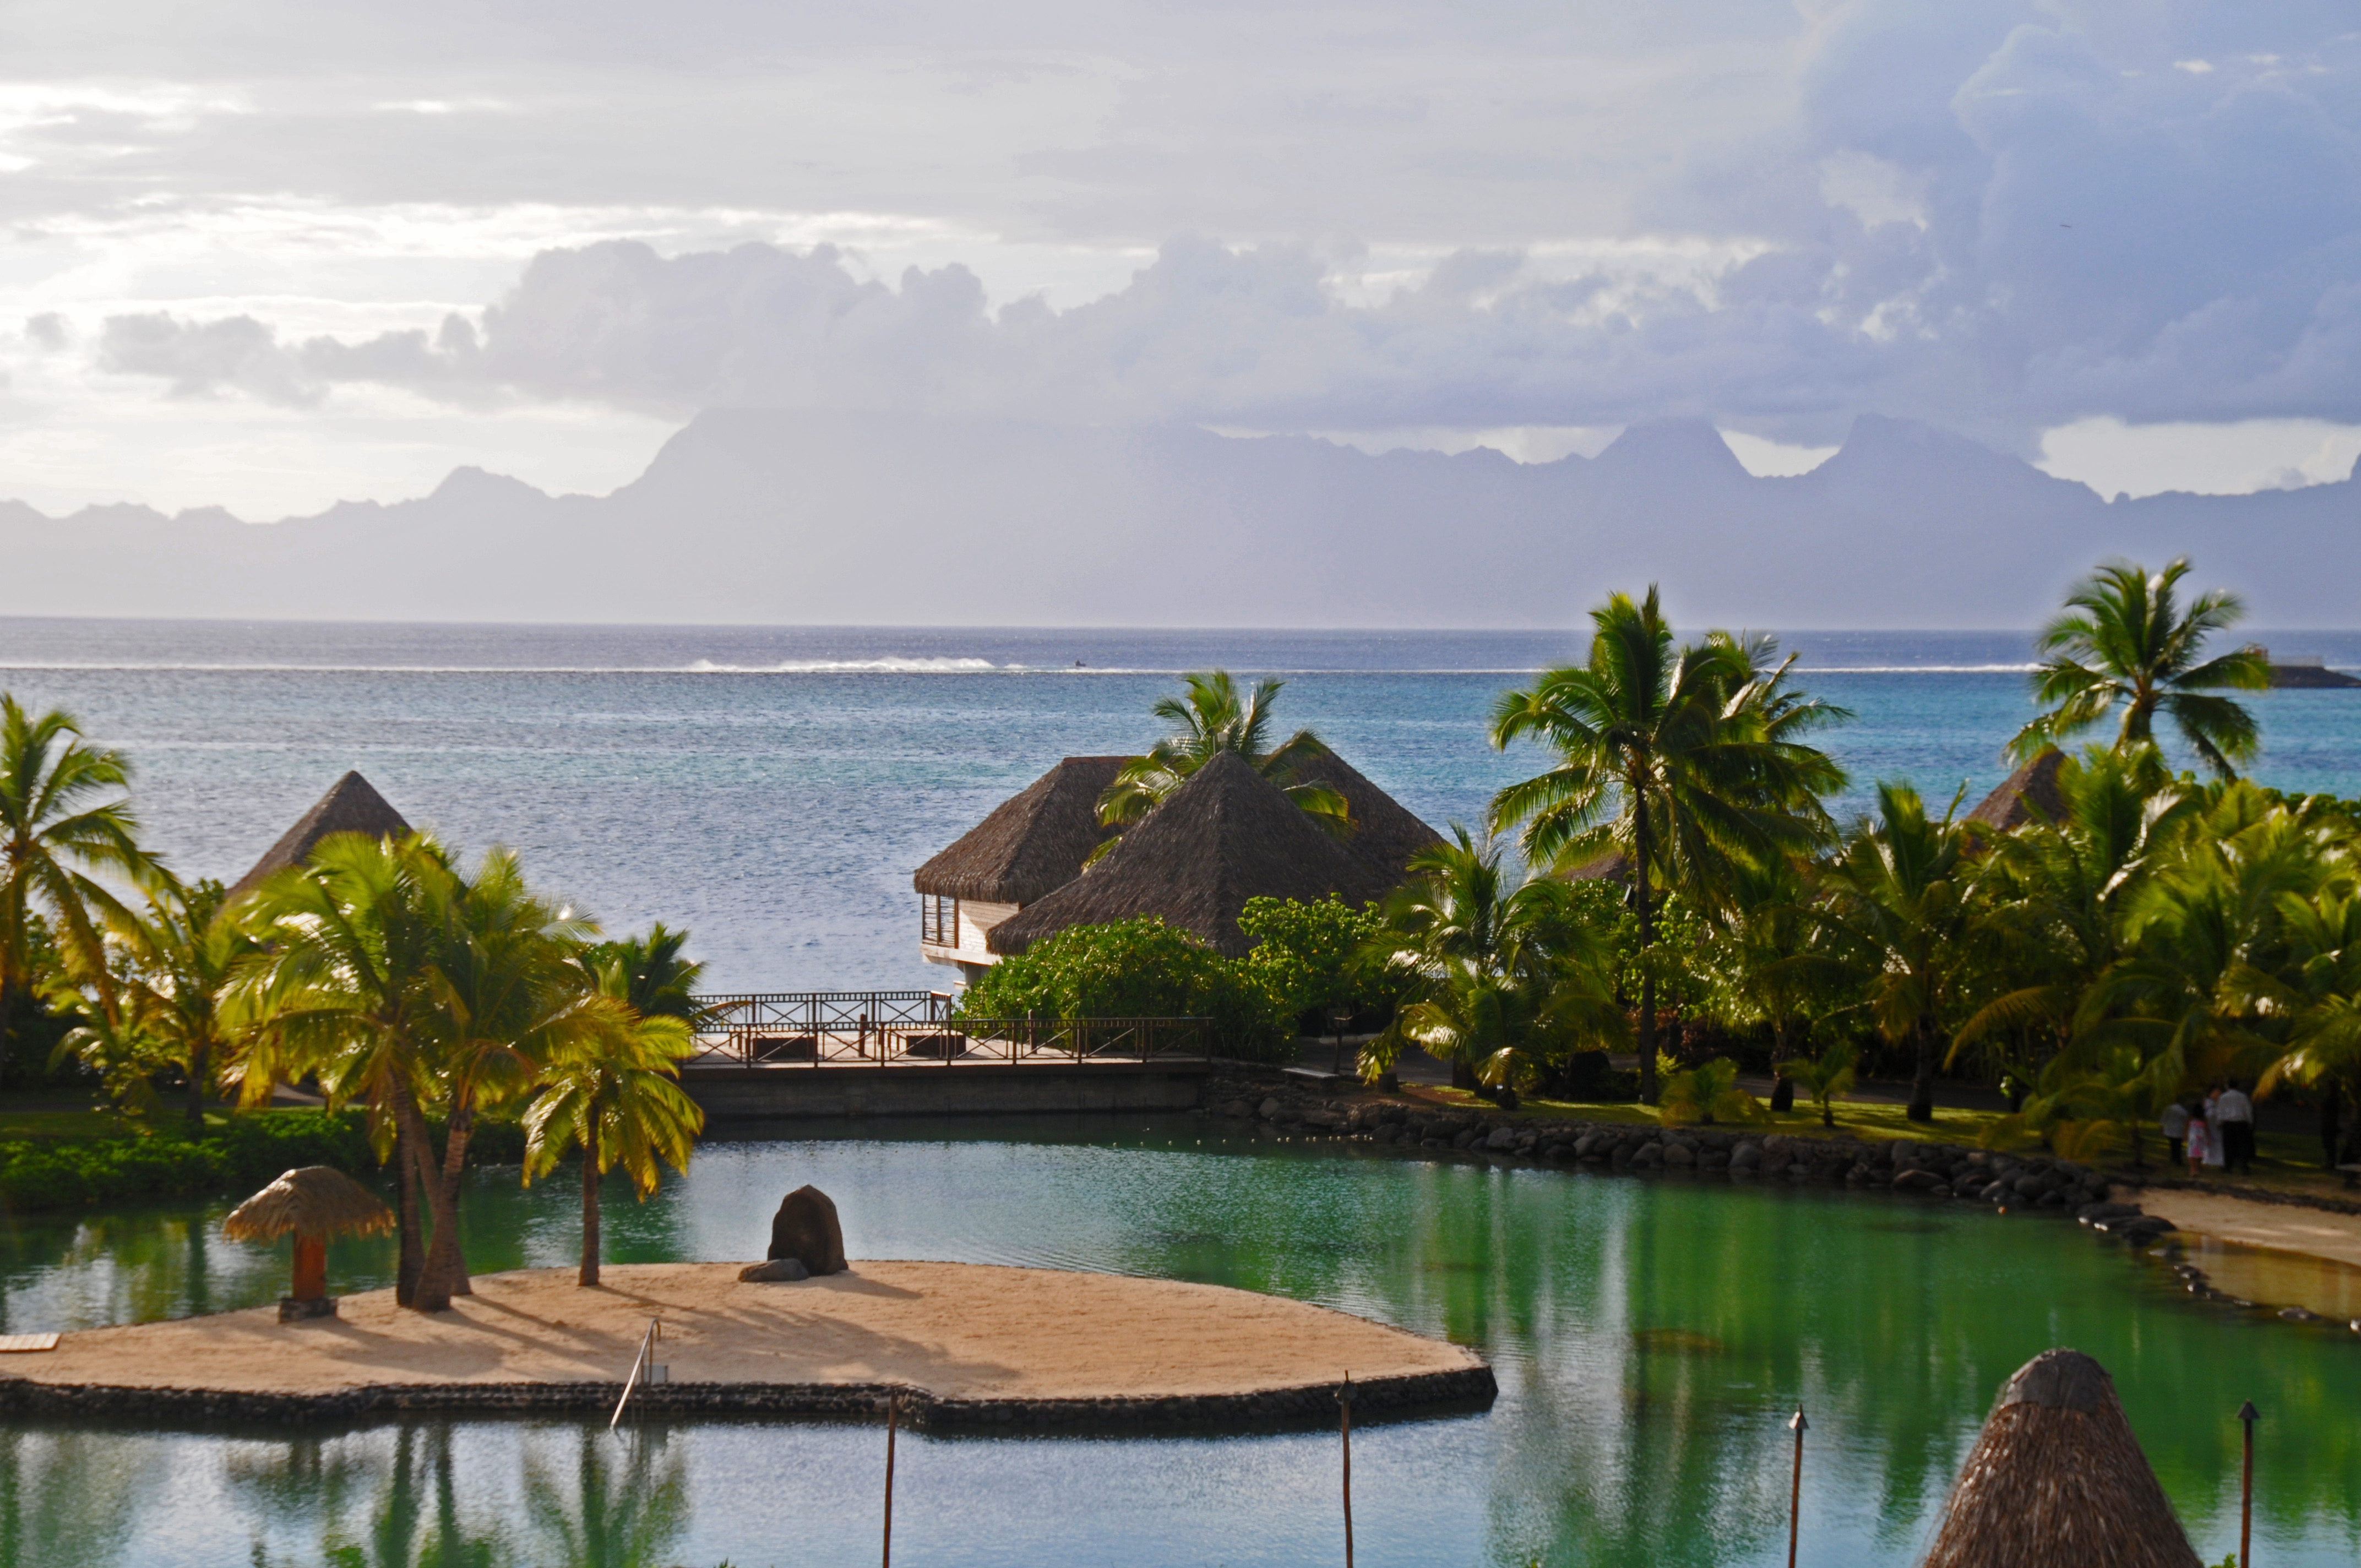 a body of water with a hut and palm trees